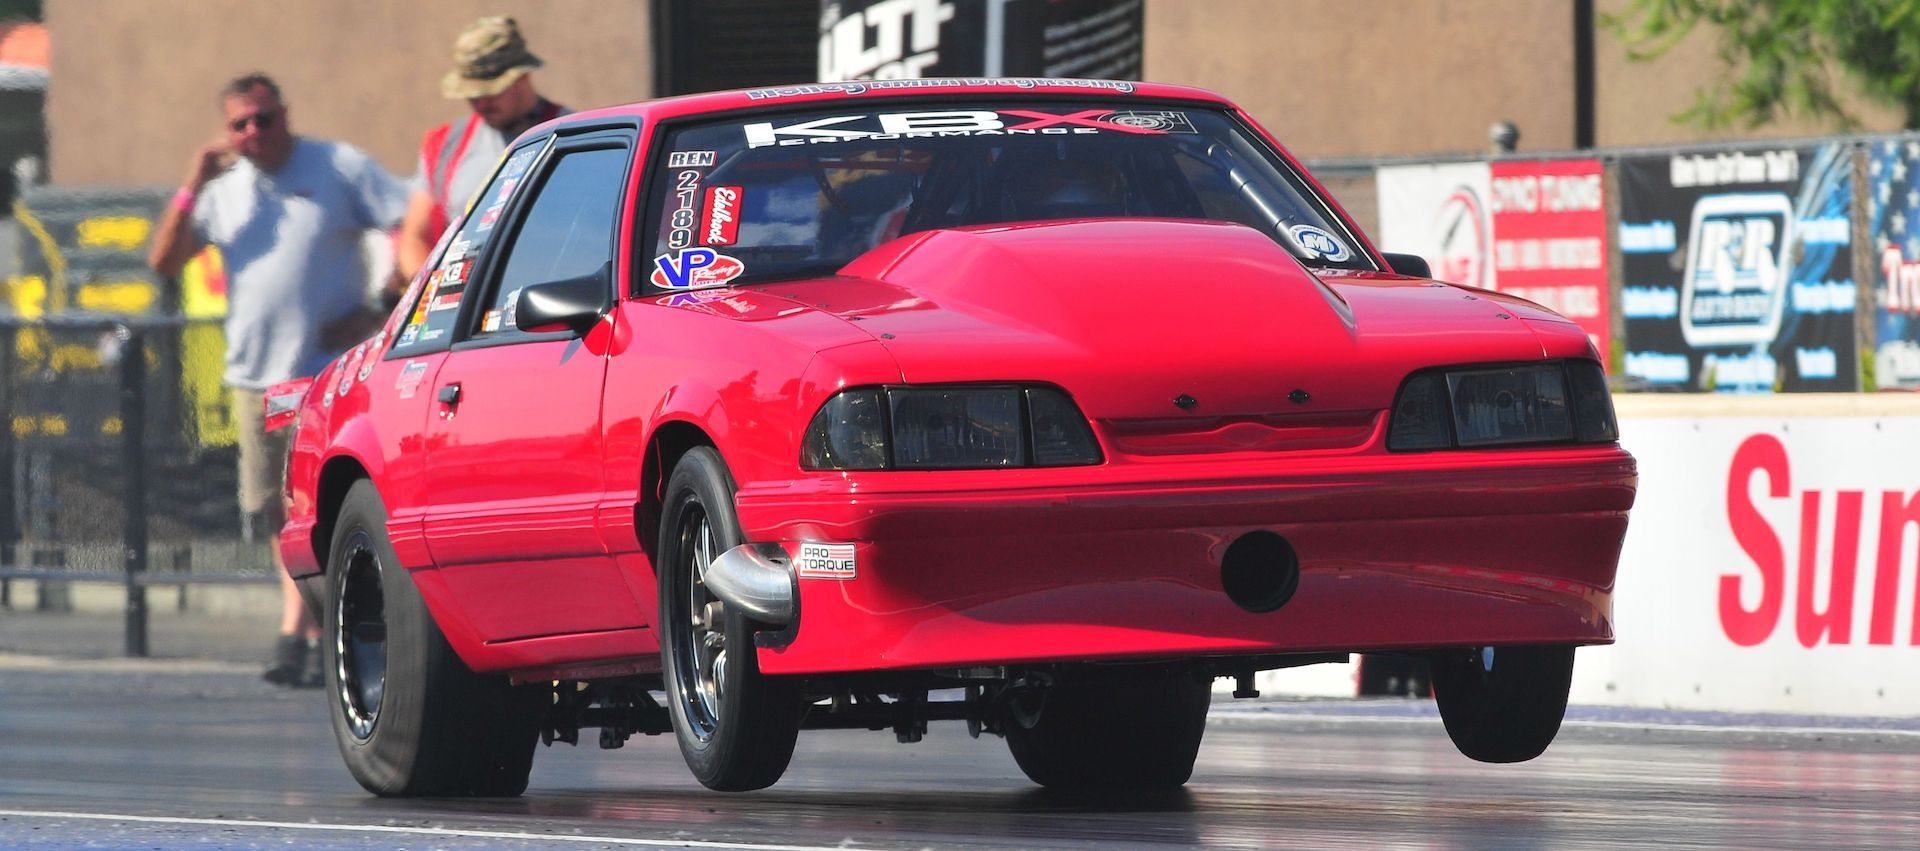 NMRA Racers Ready to Rumble for Championships & Points in Kentucky